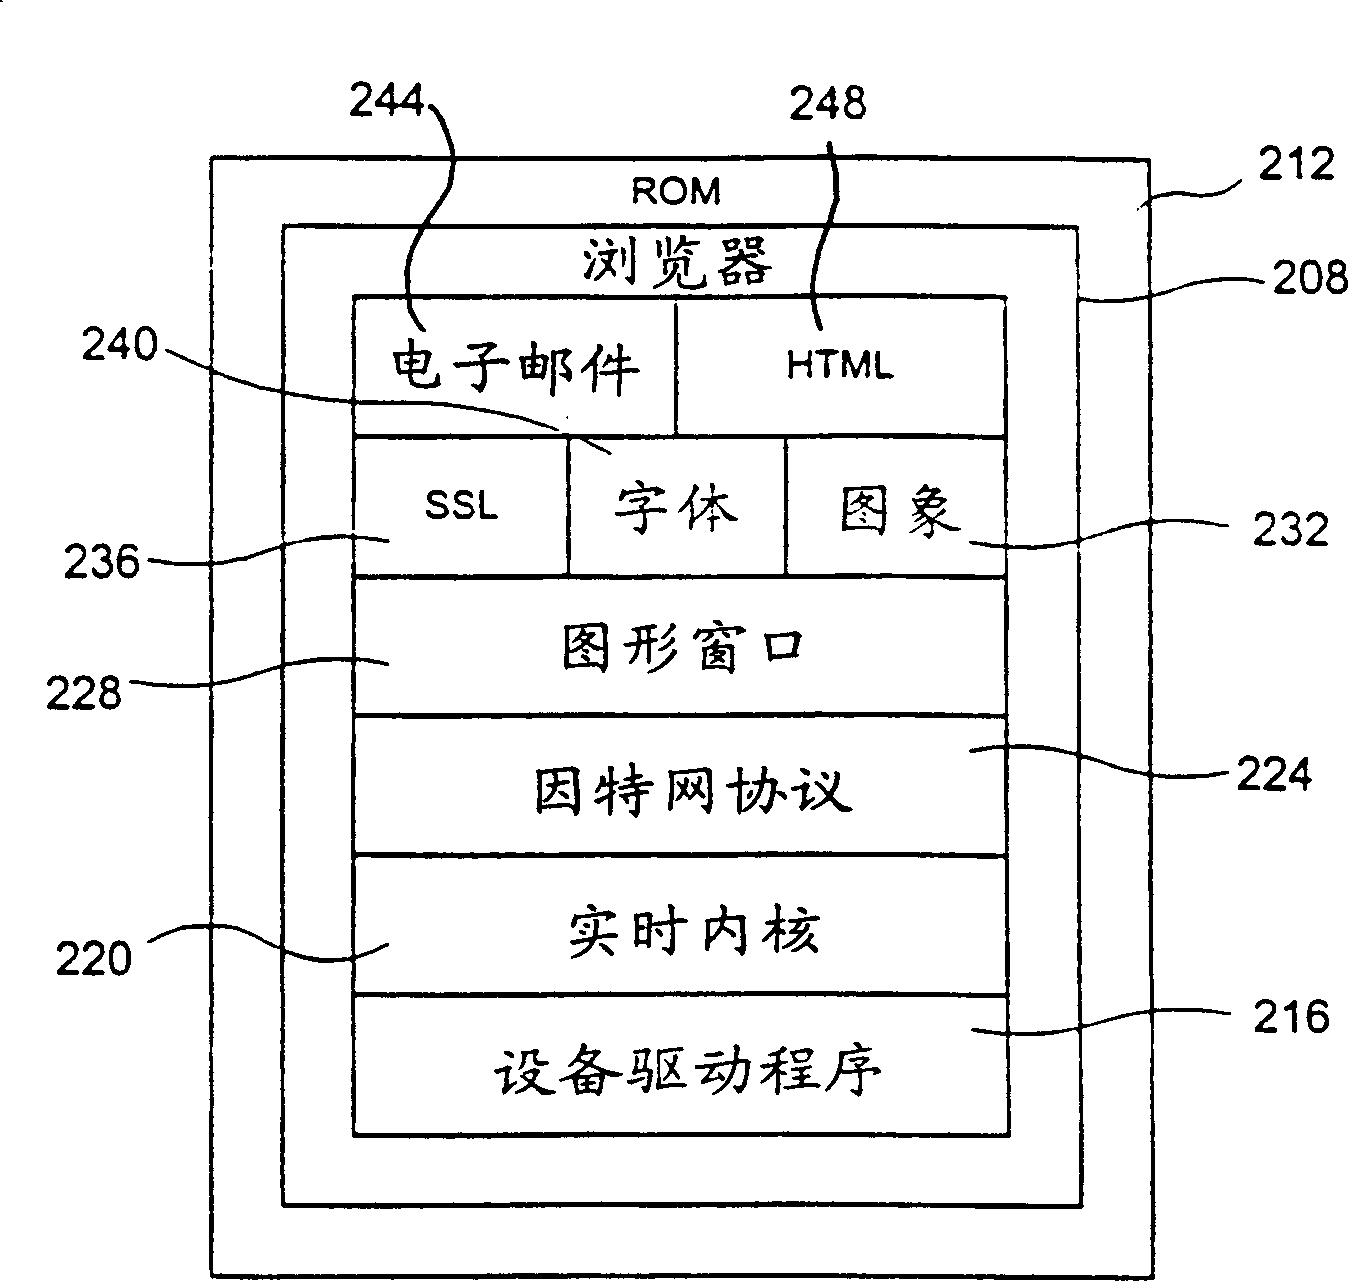 Self-contained network browser with diagnostic abilities